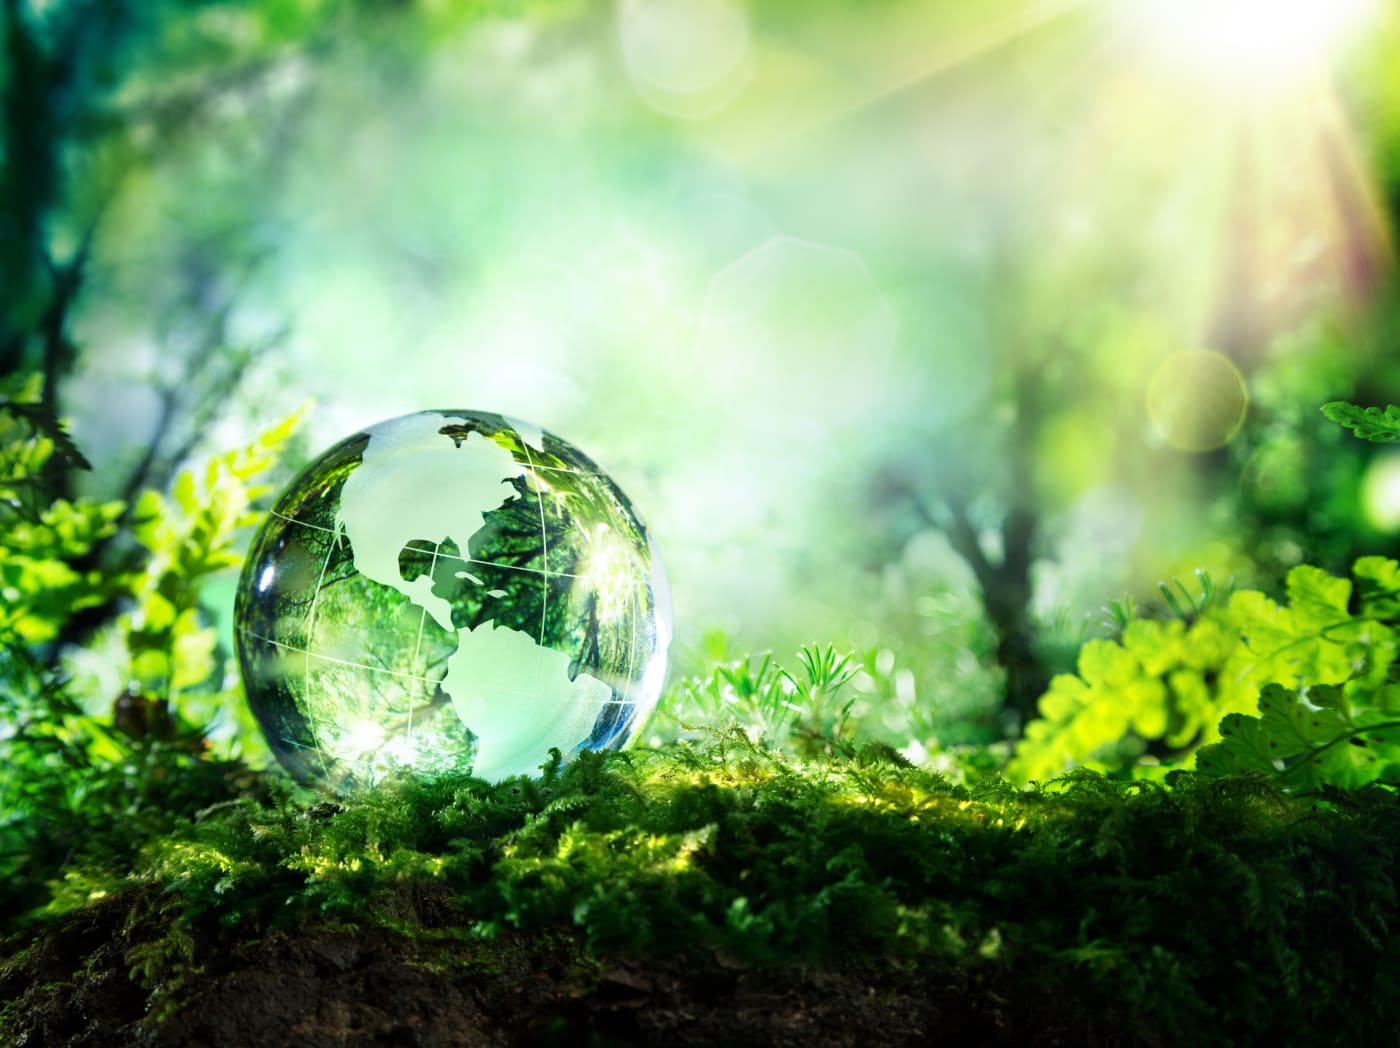 Crystal globe resting on moss in a forest - environment concept